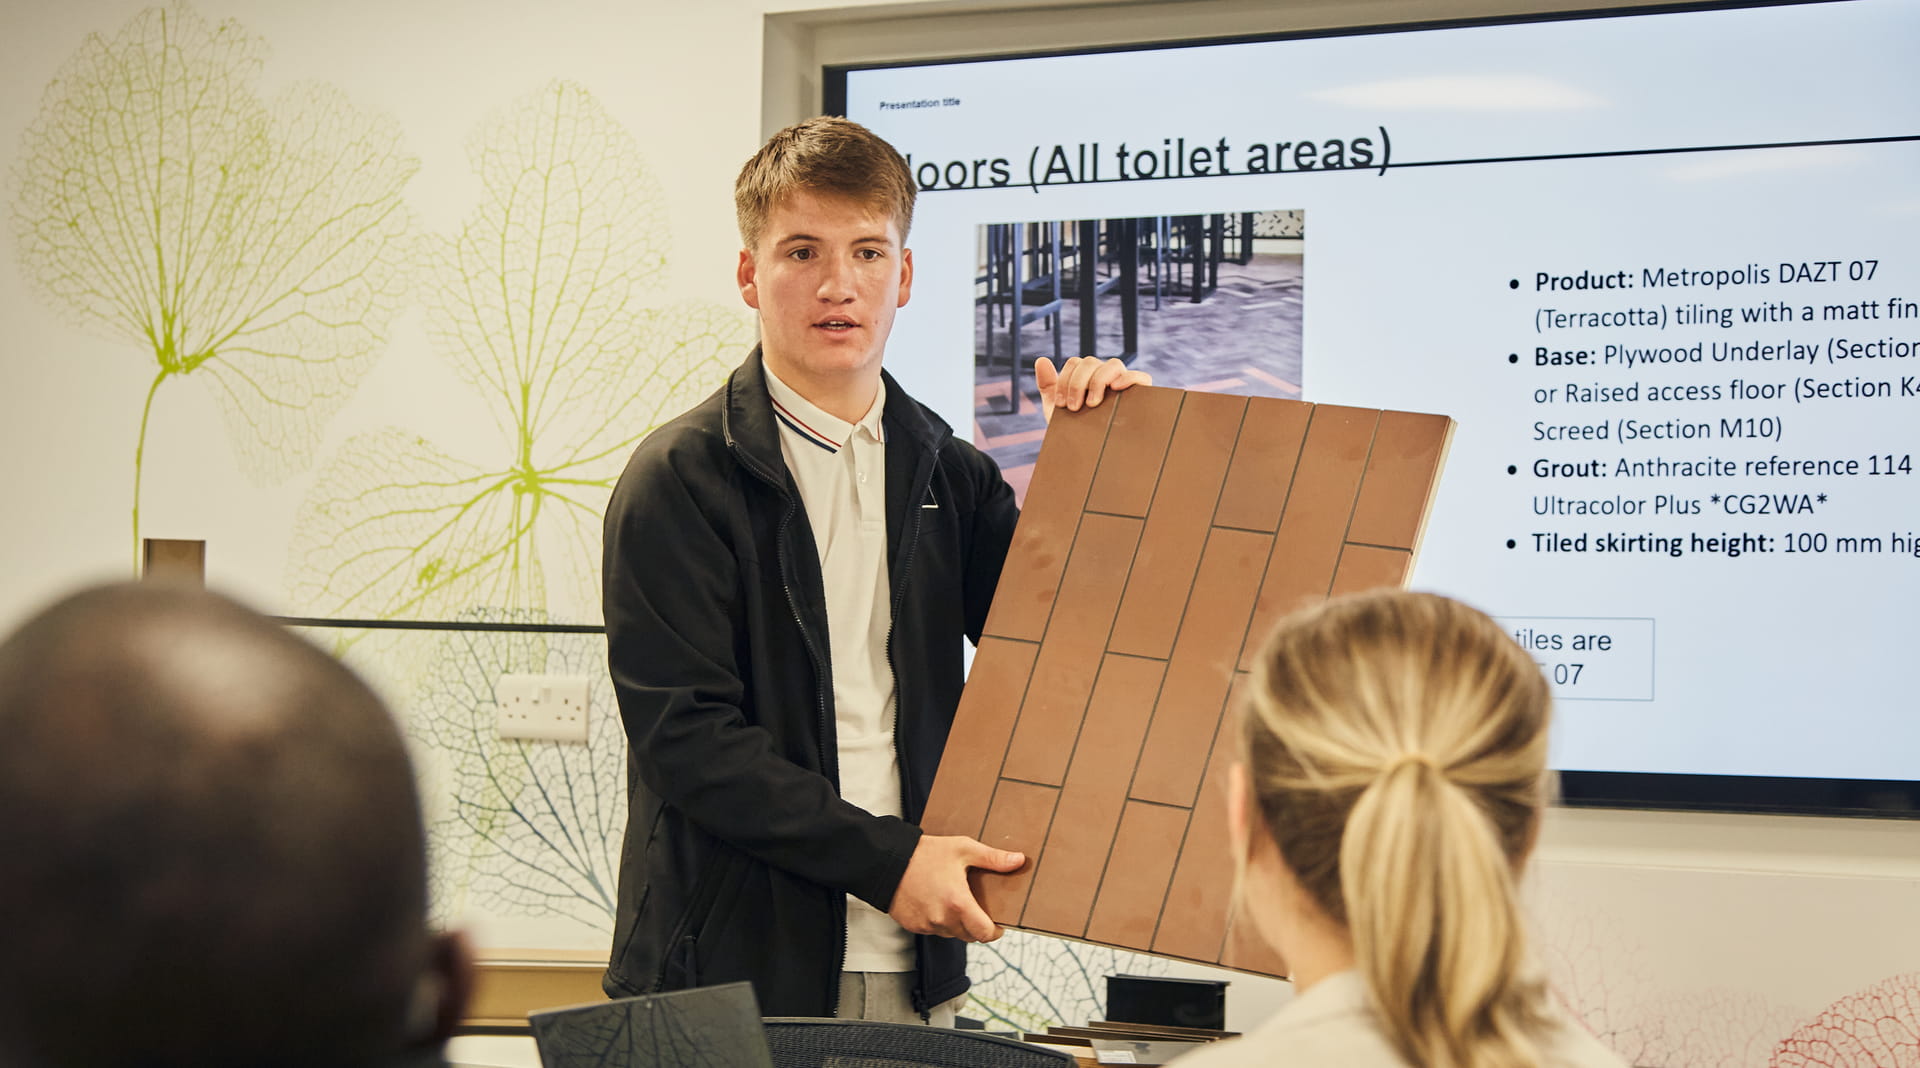 Photograph of student giving presentation with building materials